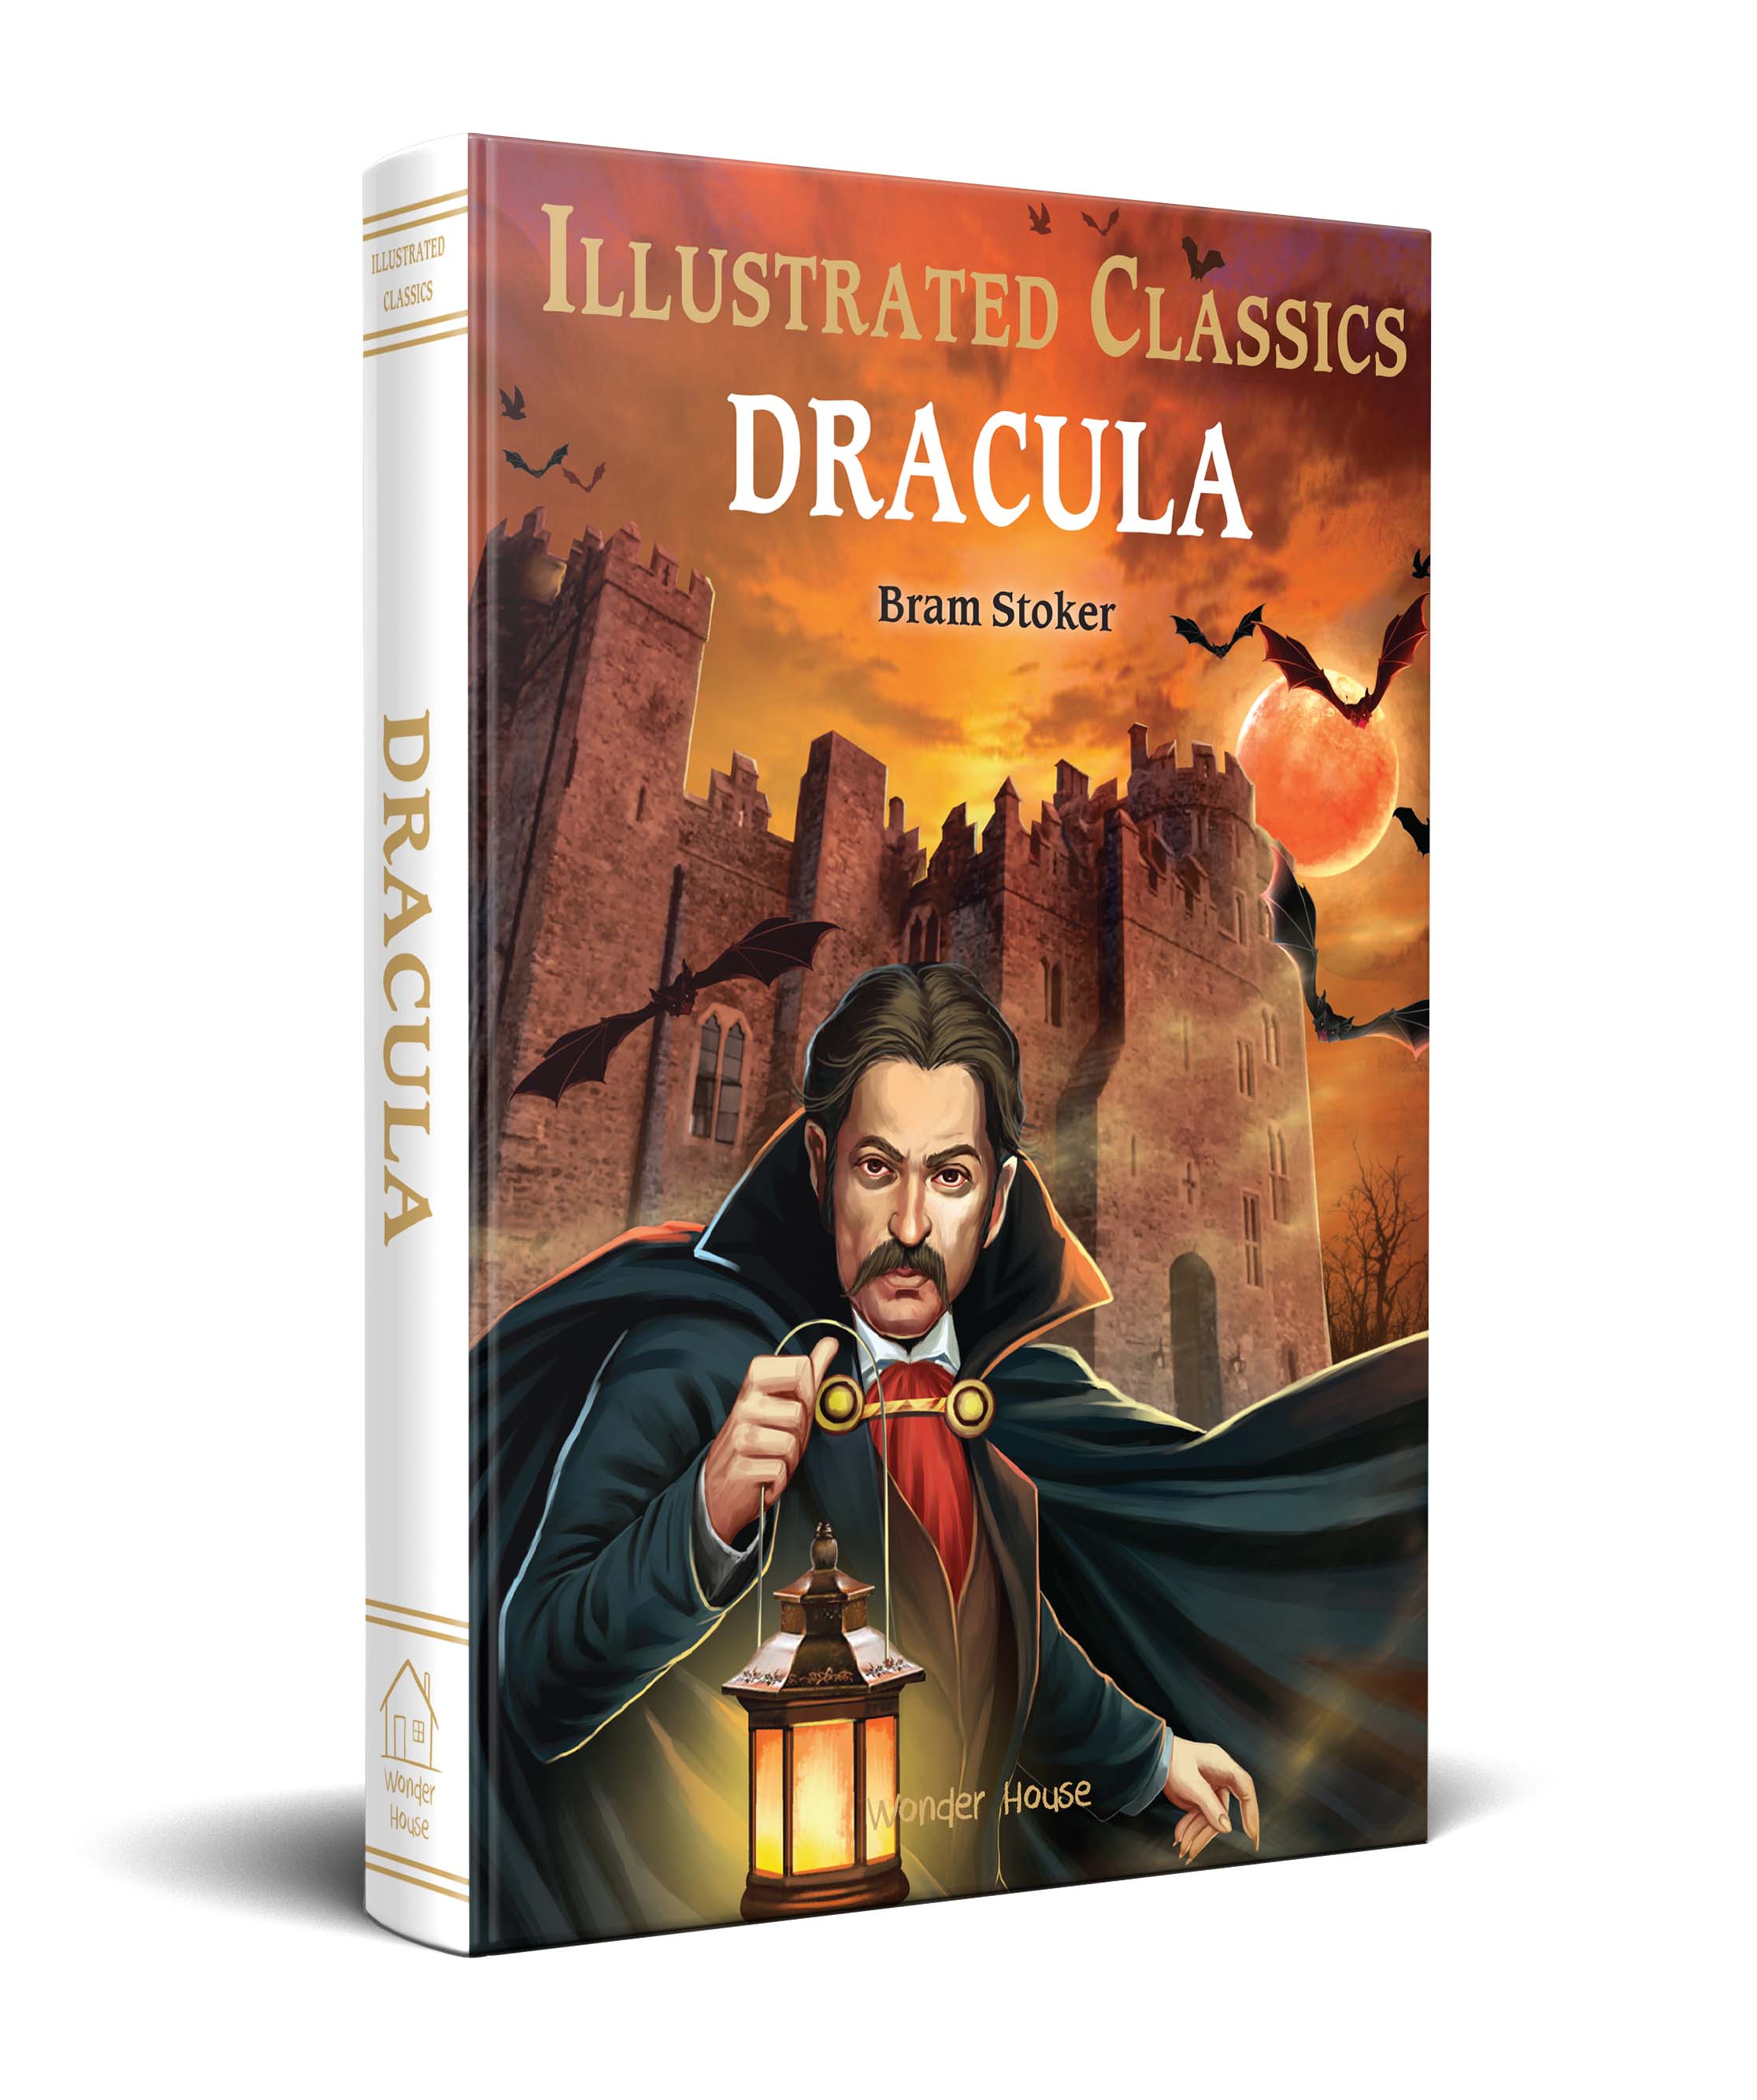 Online　Dracula　English　Review　Book　Children　(Hardback)　Classic　llustrated　Abridged　Questions　available　Novel　with　at